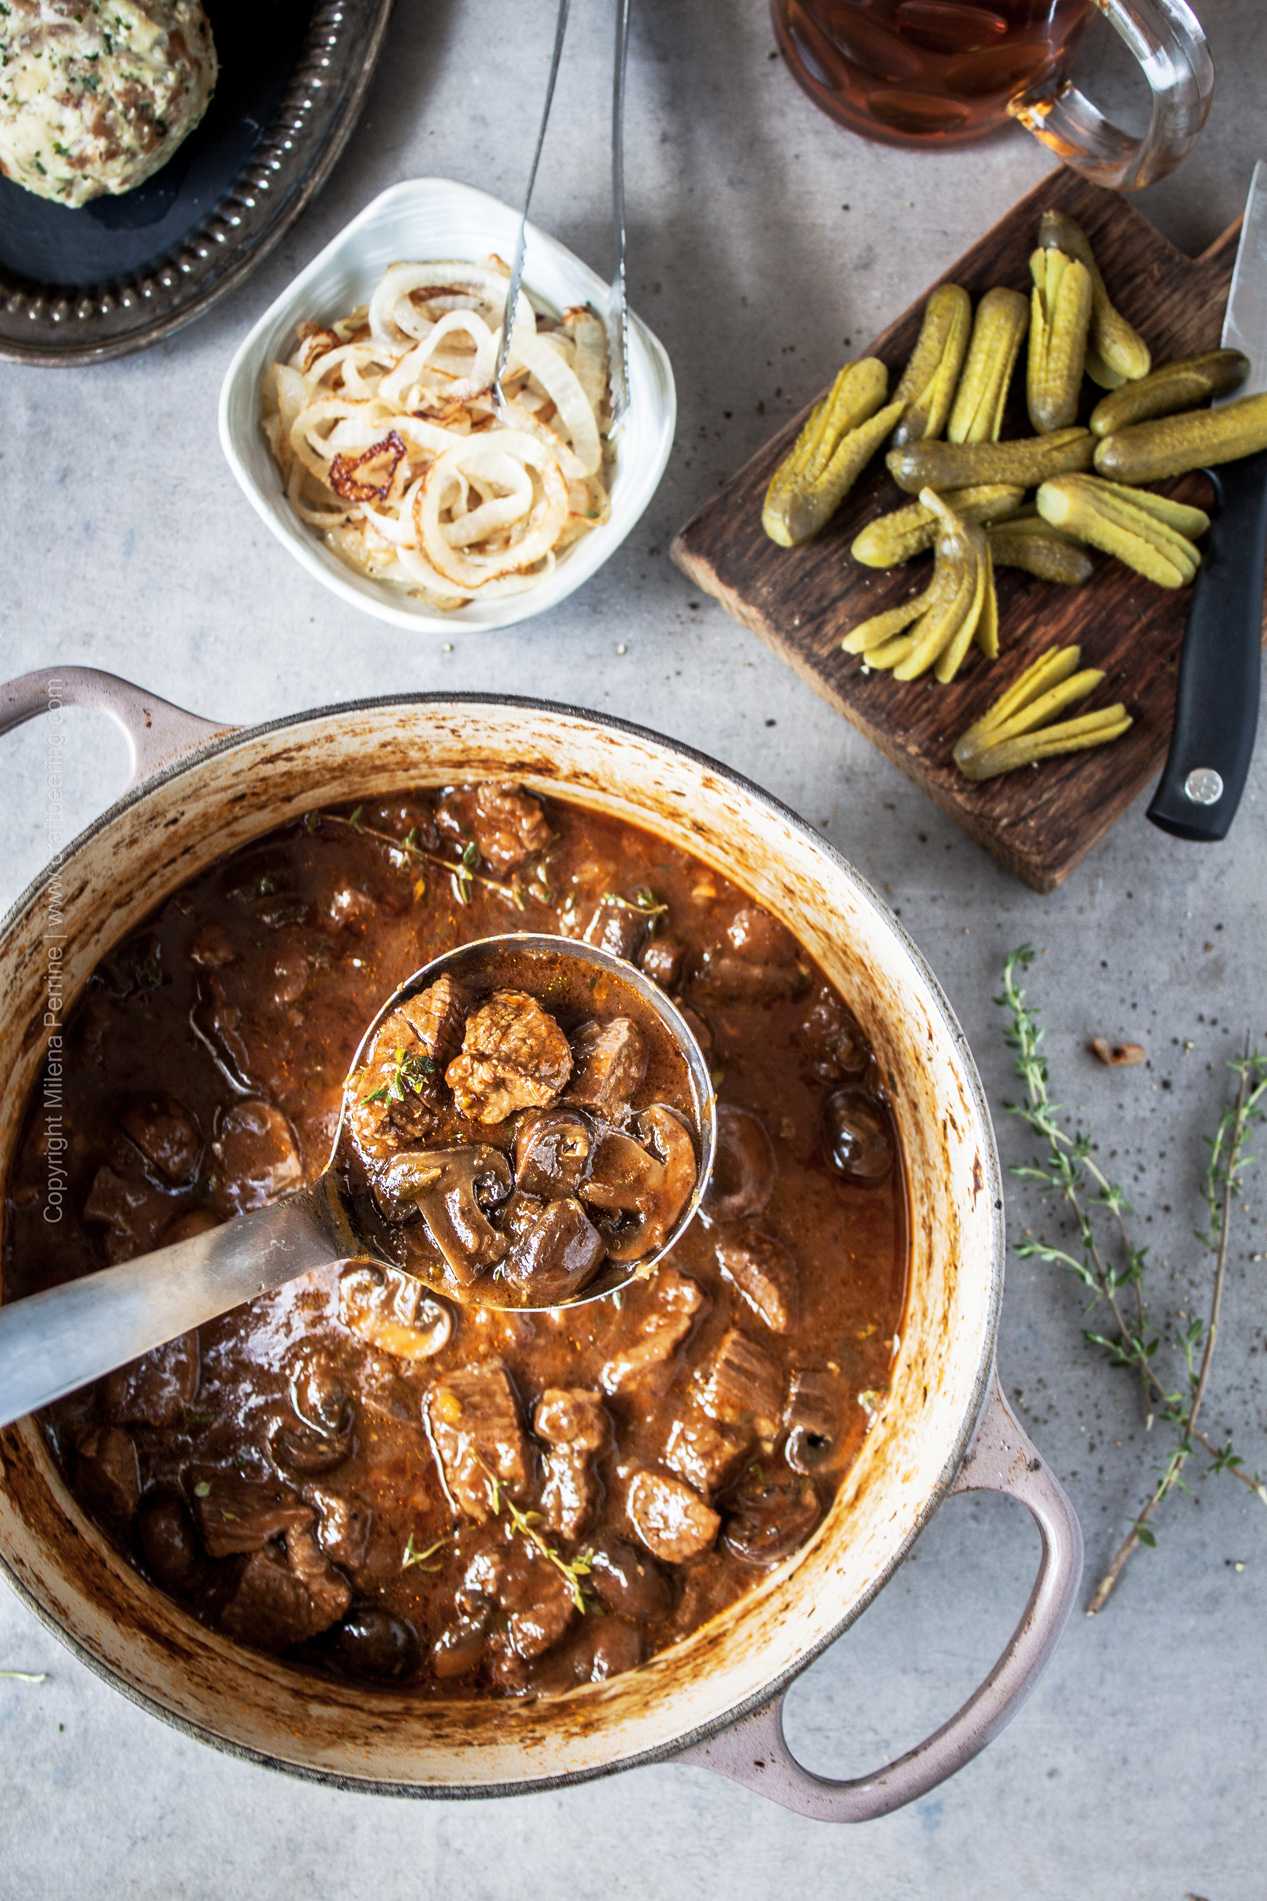 Beef stew with mushrooms and black lager, known as Bierfleisch - a Bavarian classic.